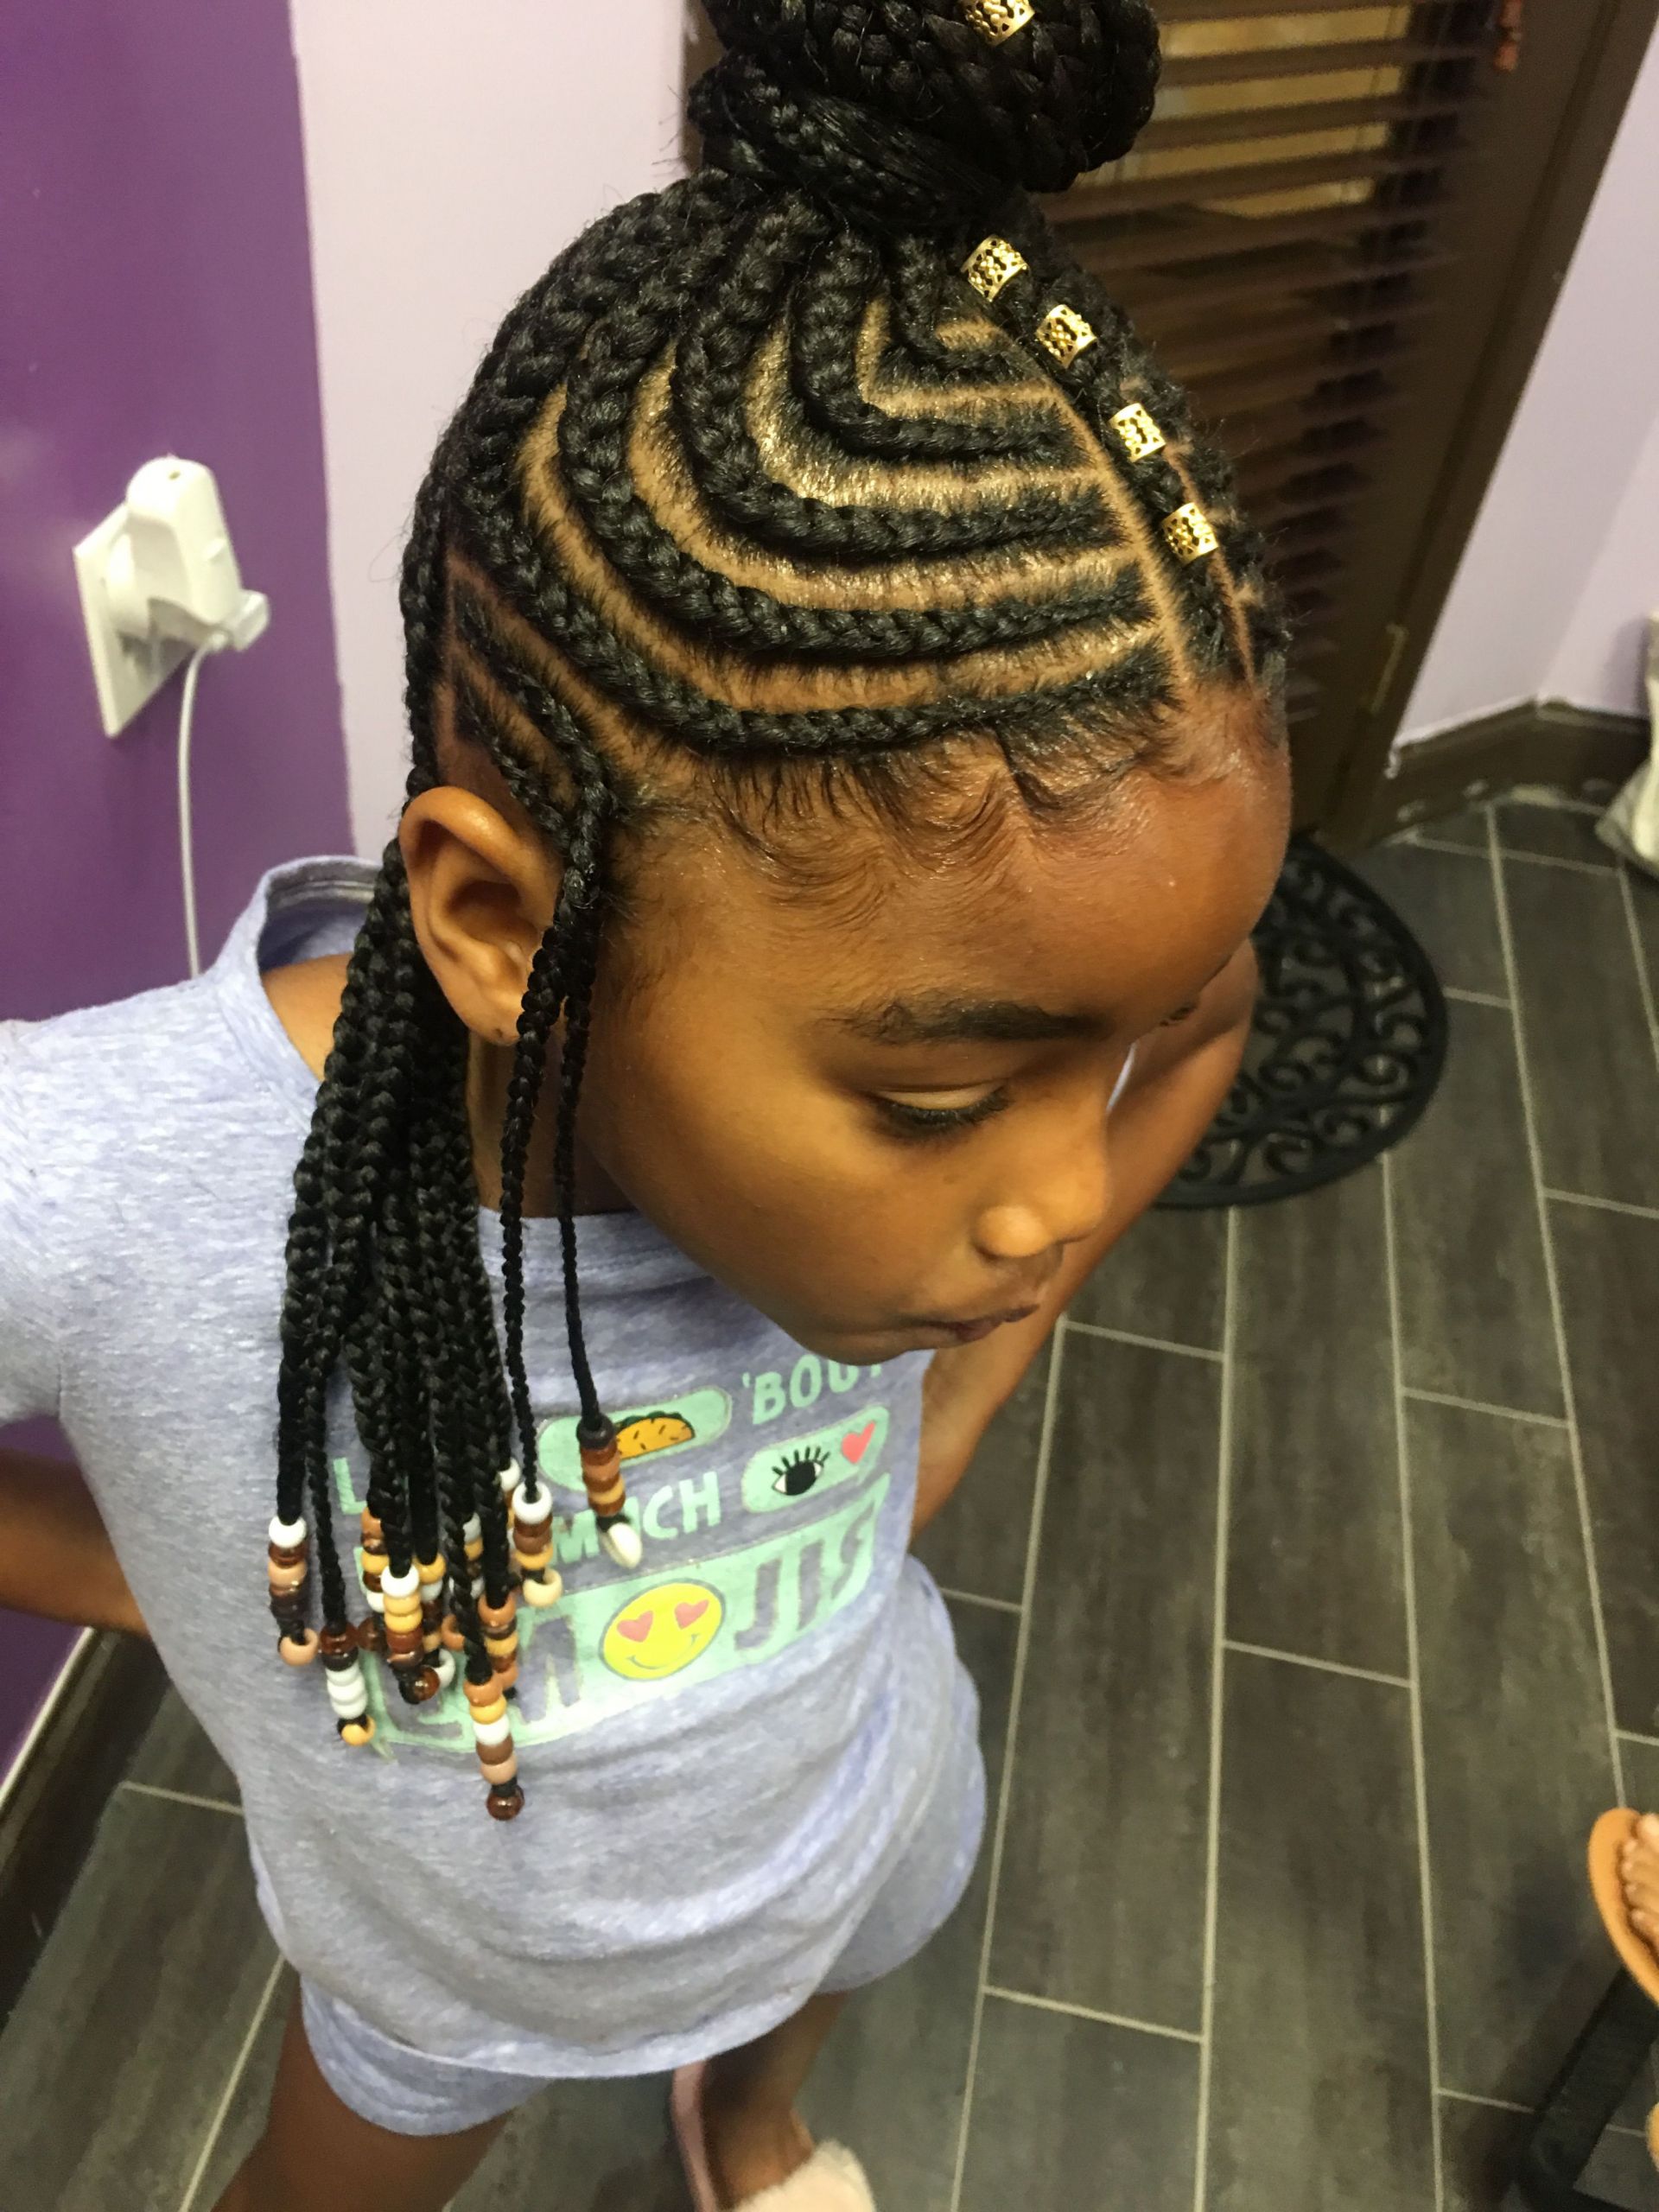 Kids Hairstyle With Braids
 She Used Flat Twists To Create Fabulous Summer Curls